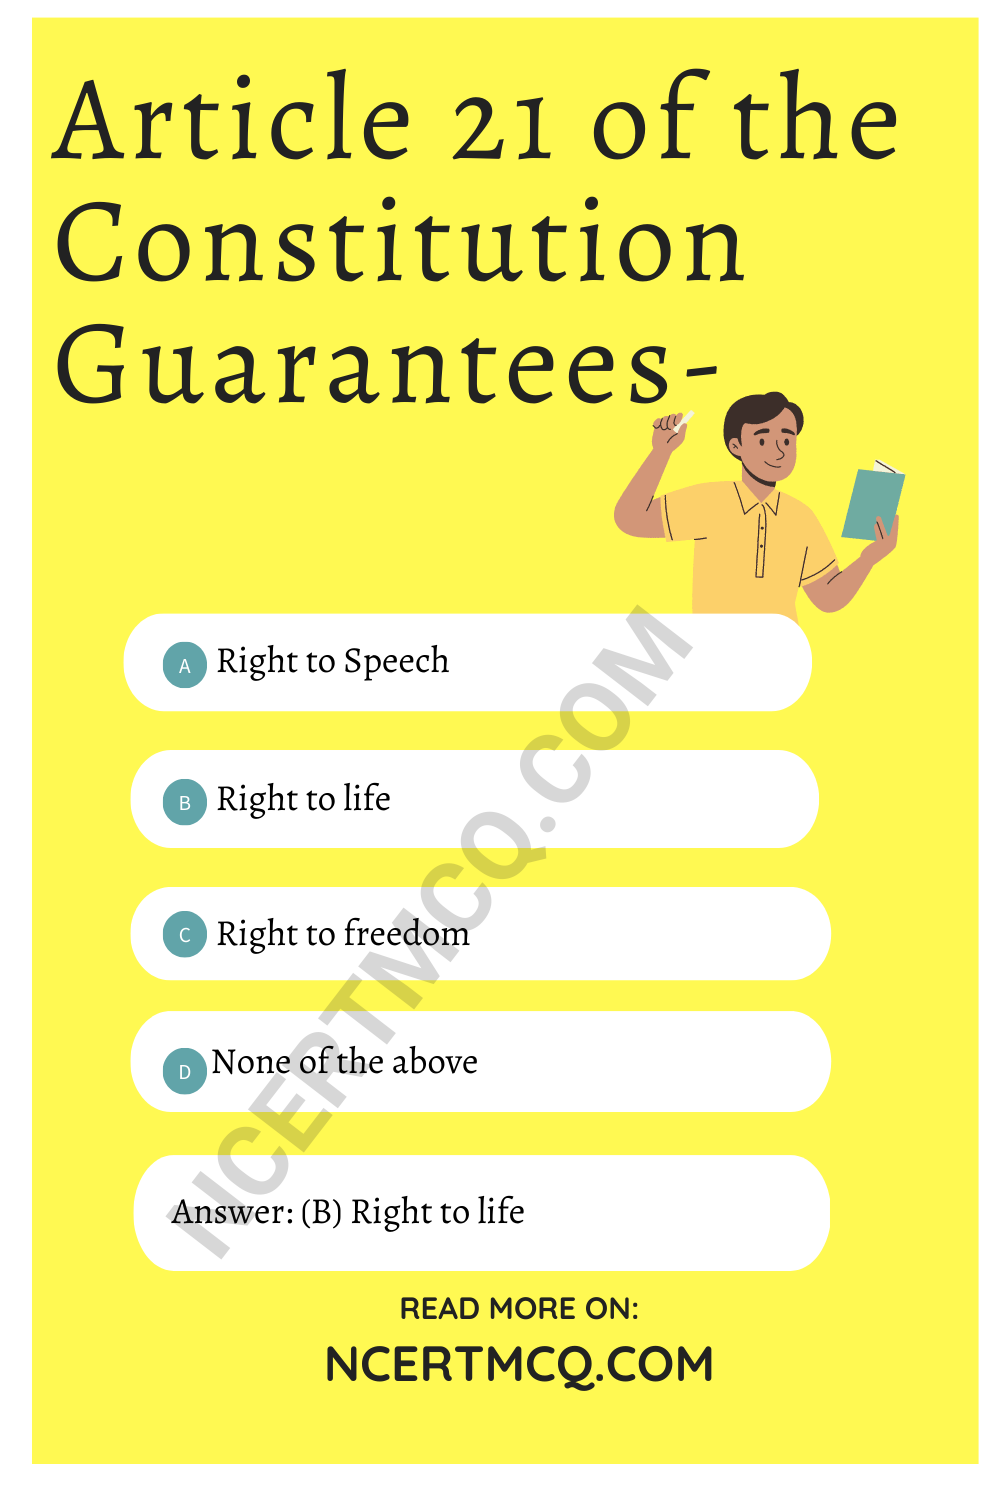 Article 21 of the Constitution Guarantees-